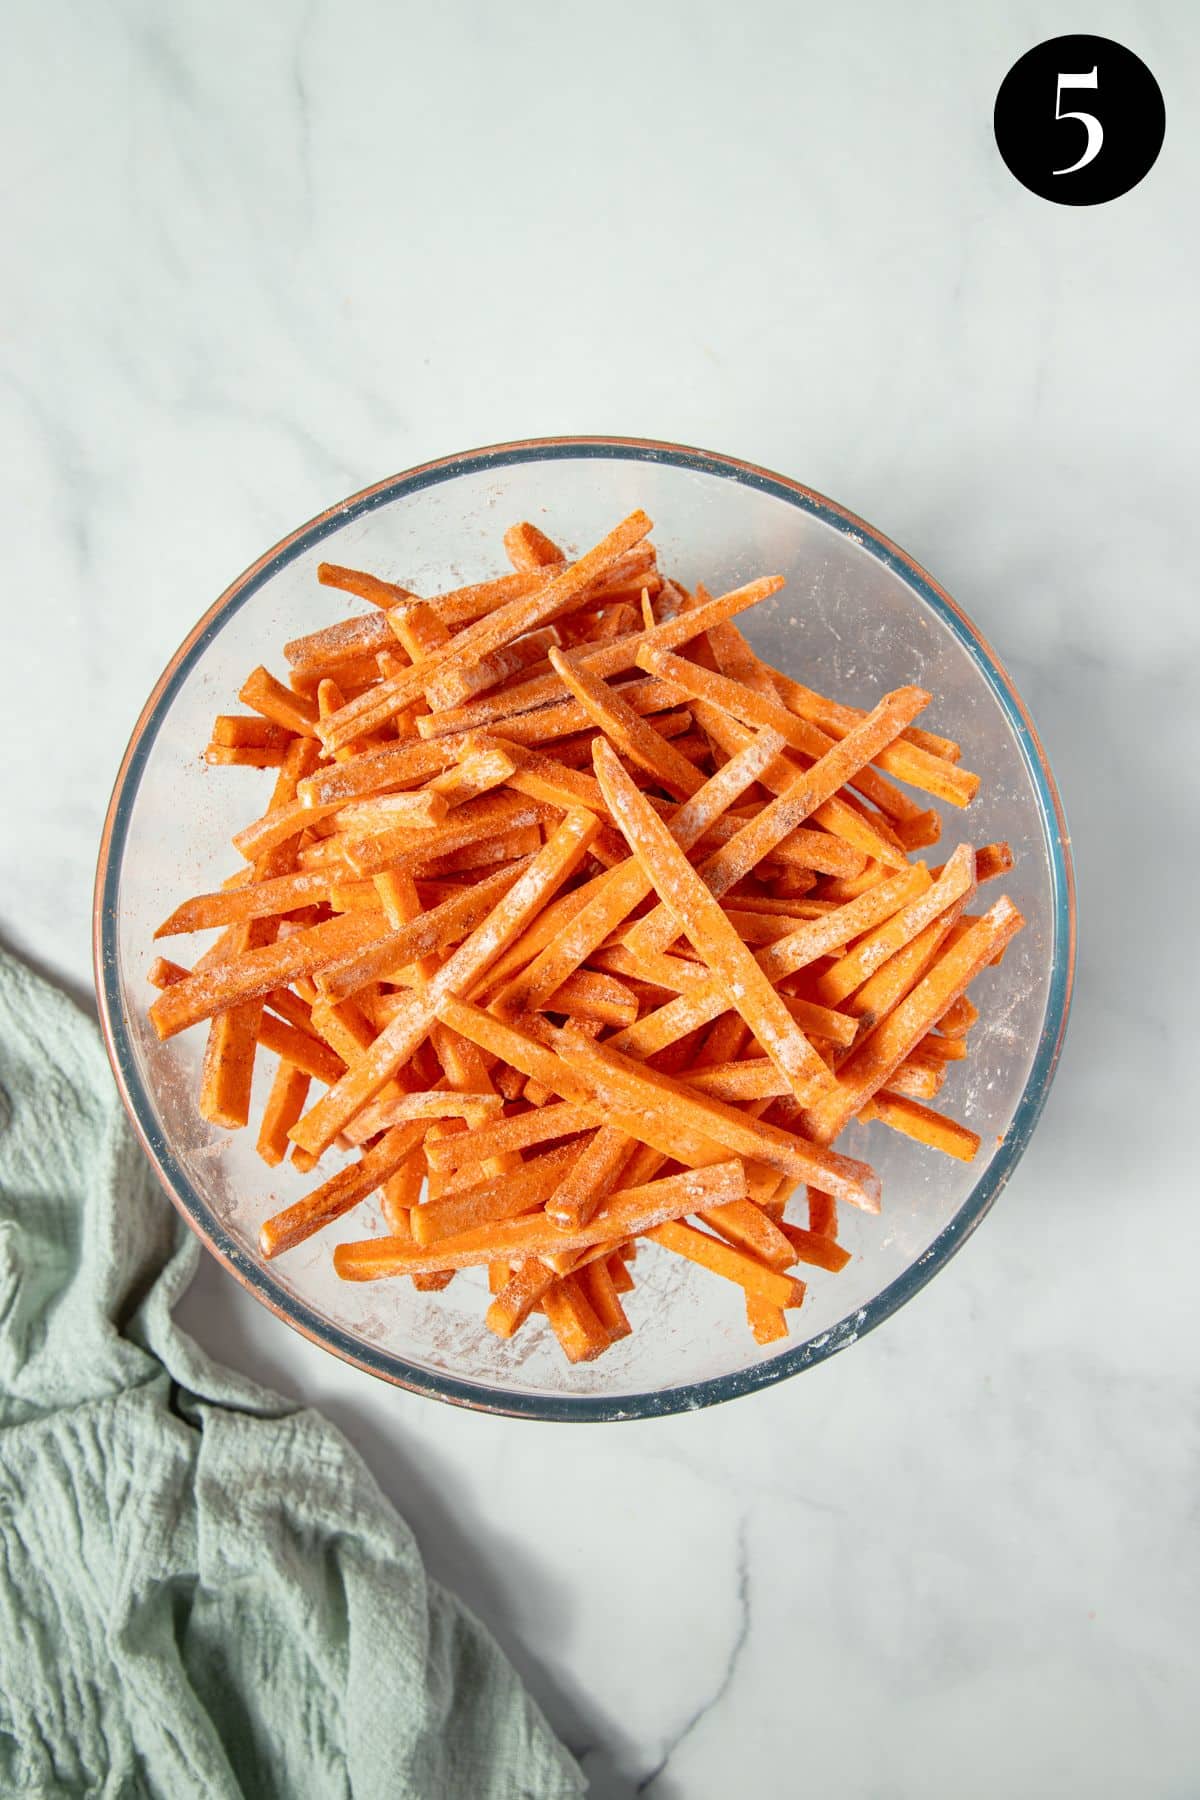 sweet potato fries in a bowl, coated in cornflour and spices.